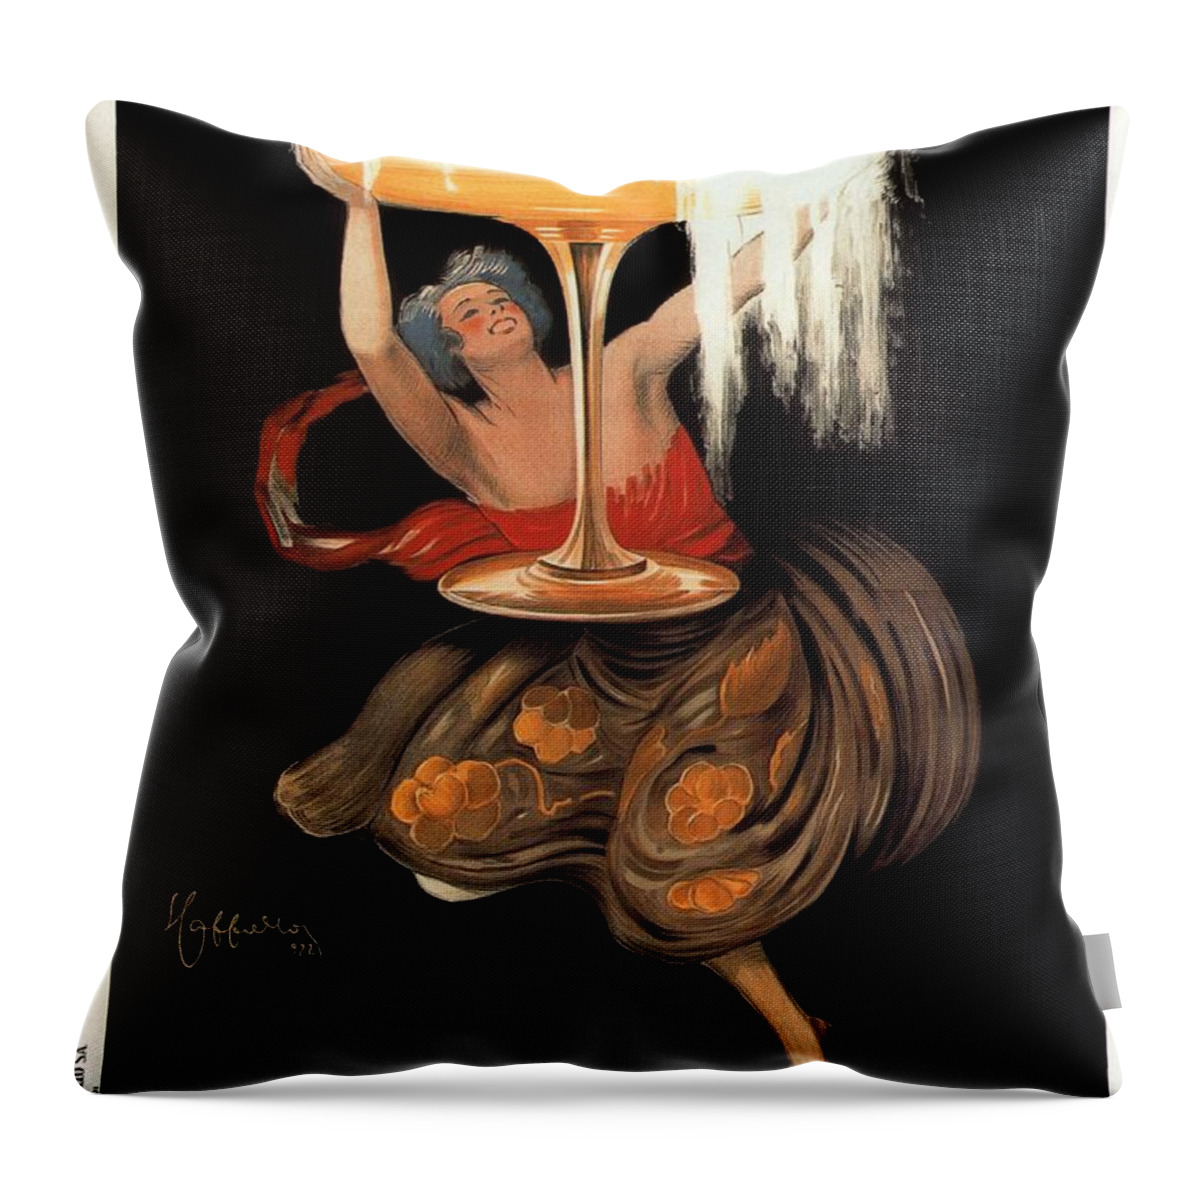 Contratto Throw Pillow featuring the mixed media Contratto - Vintage Liquor Advertising Poster by Studio Grafiikka